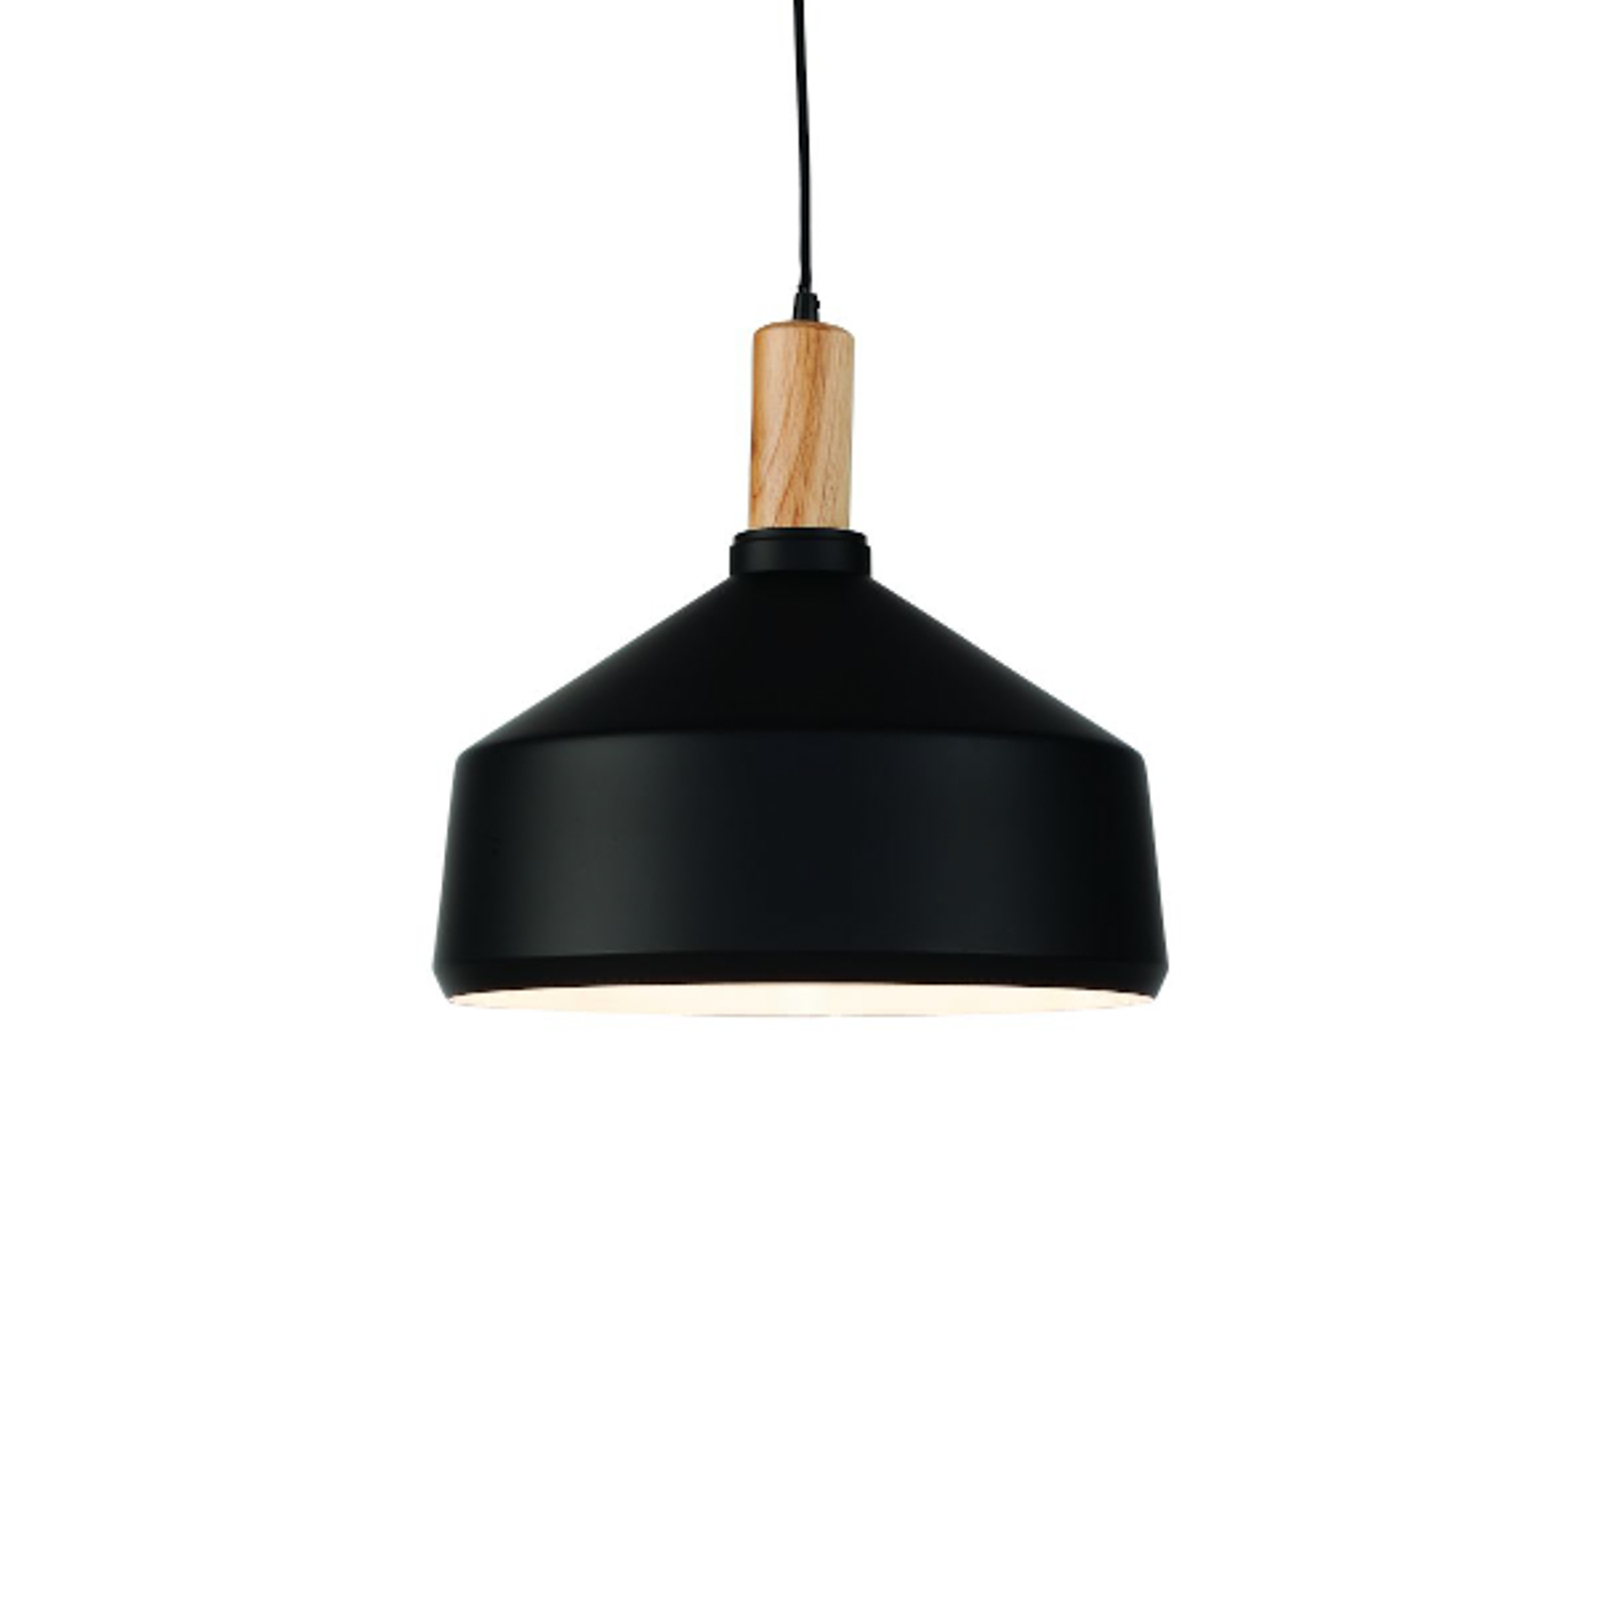 It's about RoMi Melbourne hanglamp, hoogte 34 cm